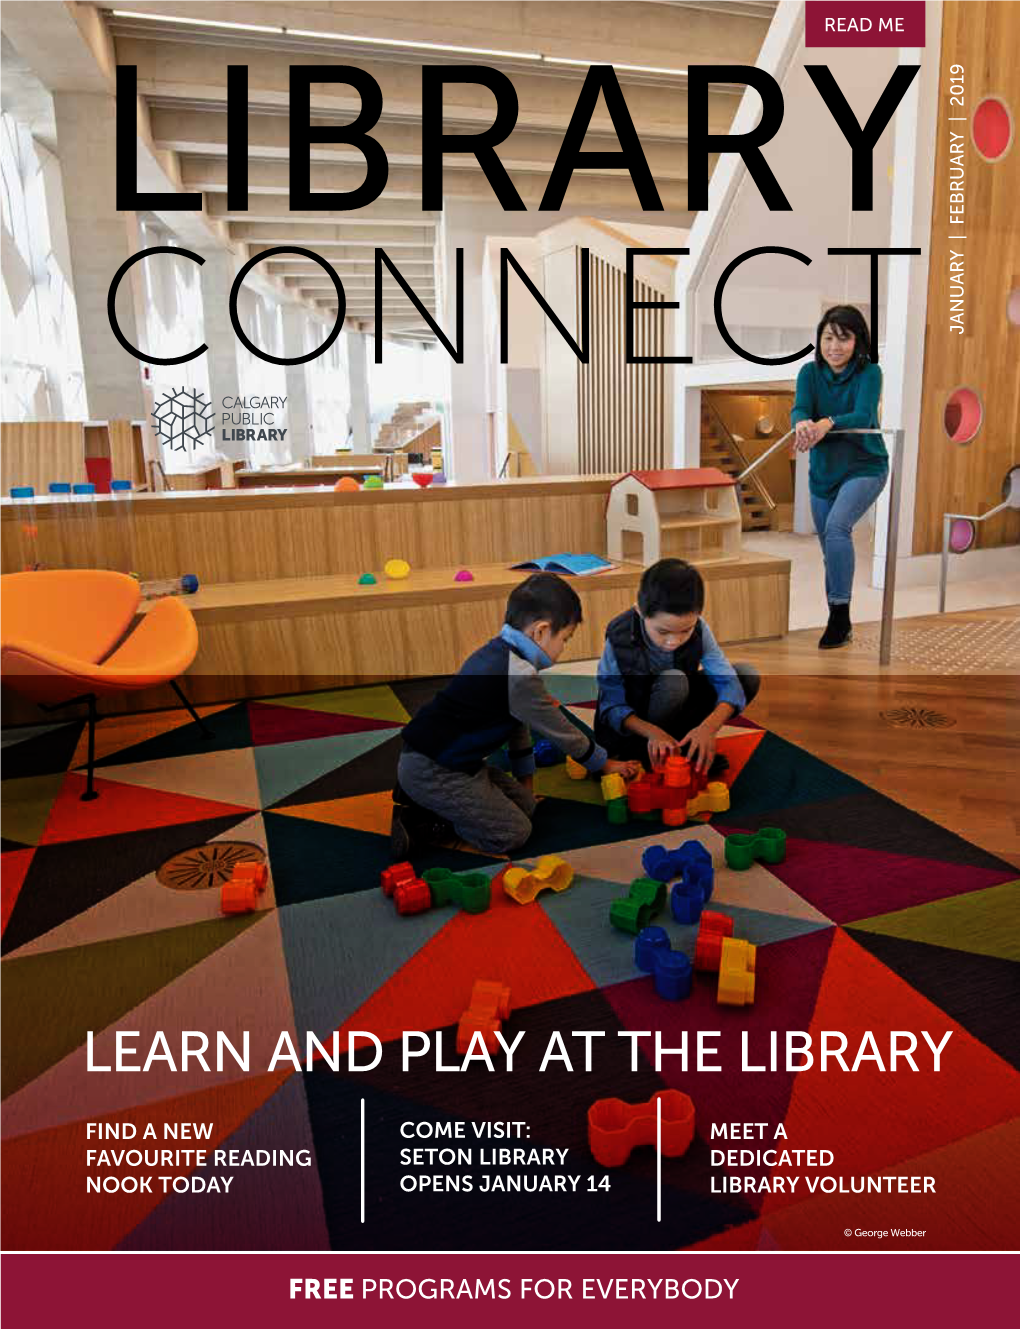 CONNECT FREE PROGRAMS FOREVERYBODY OPENS JANUARY 14 SETON LIBRARY COME VISIT: LIBRARY VOLUNTEER DEDICATED MEET a READ ME © Georgewebber